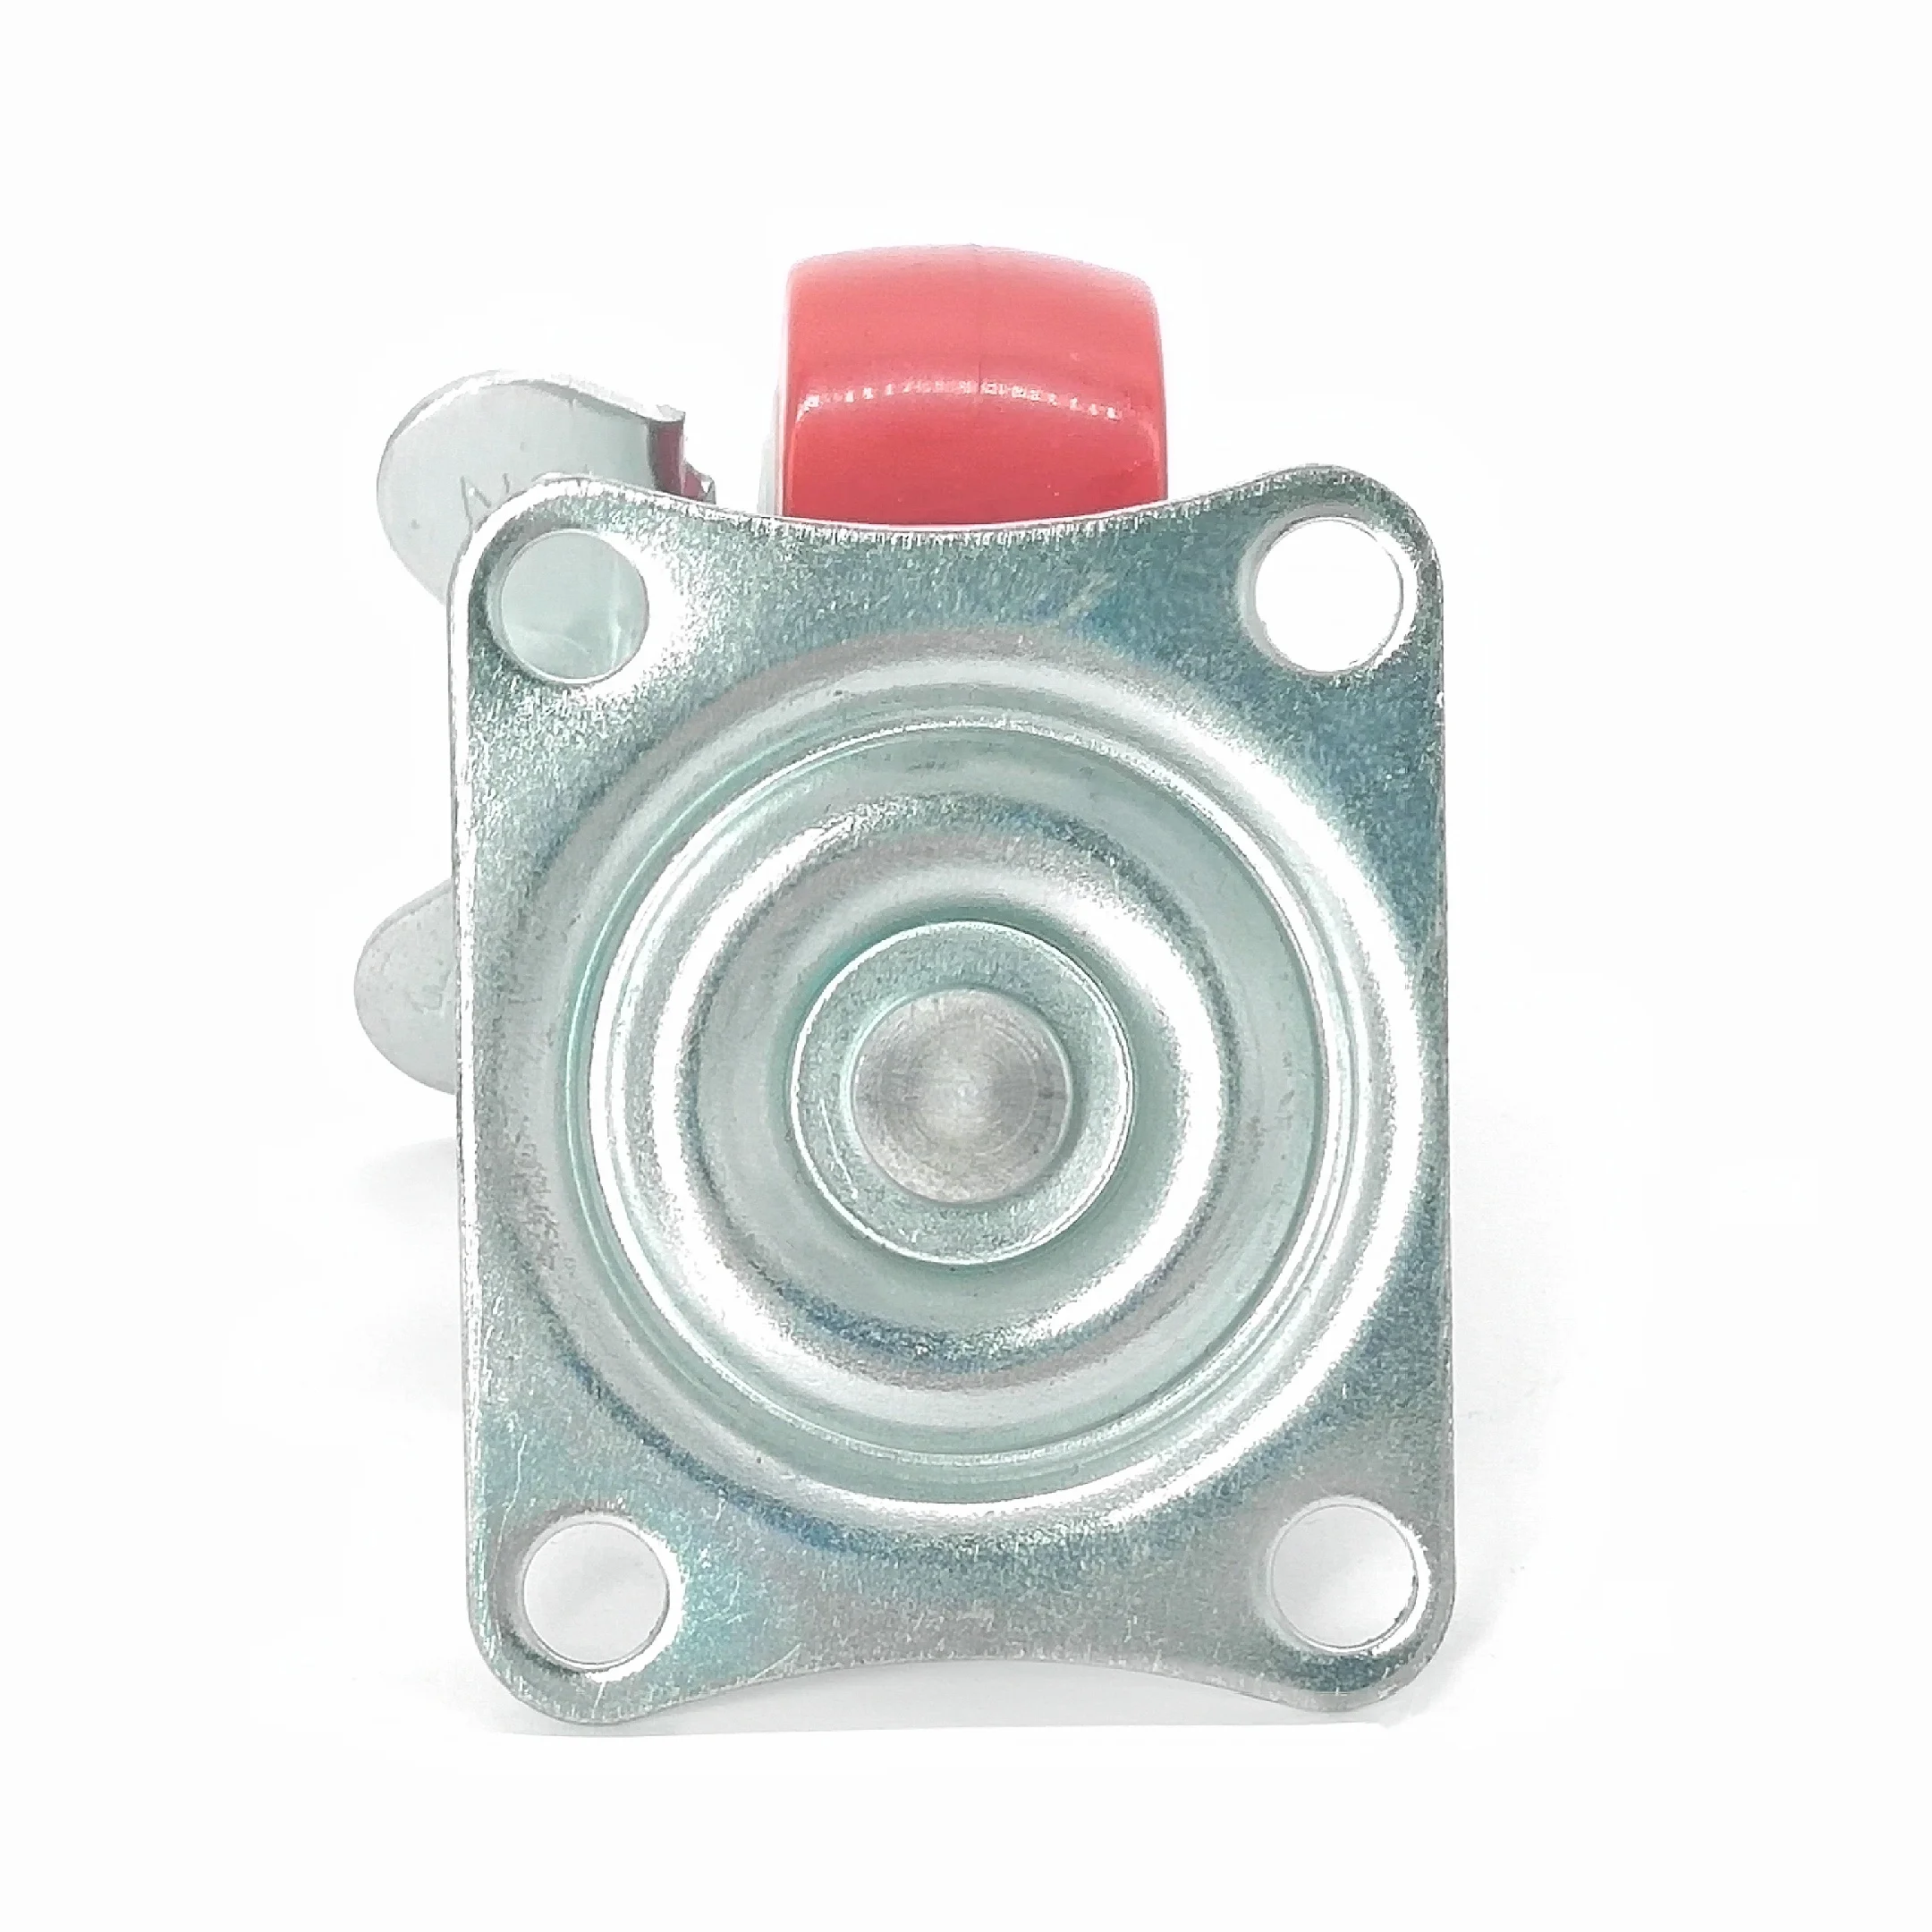 1.5 2 2.5 3 Inch Light Duty Zinc Plated Small Metal Side Brake Red Furniture Table Leg Mini Caster Wheels